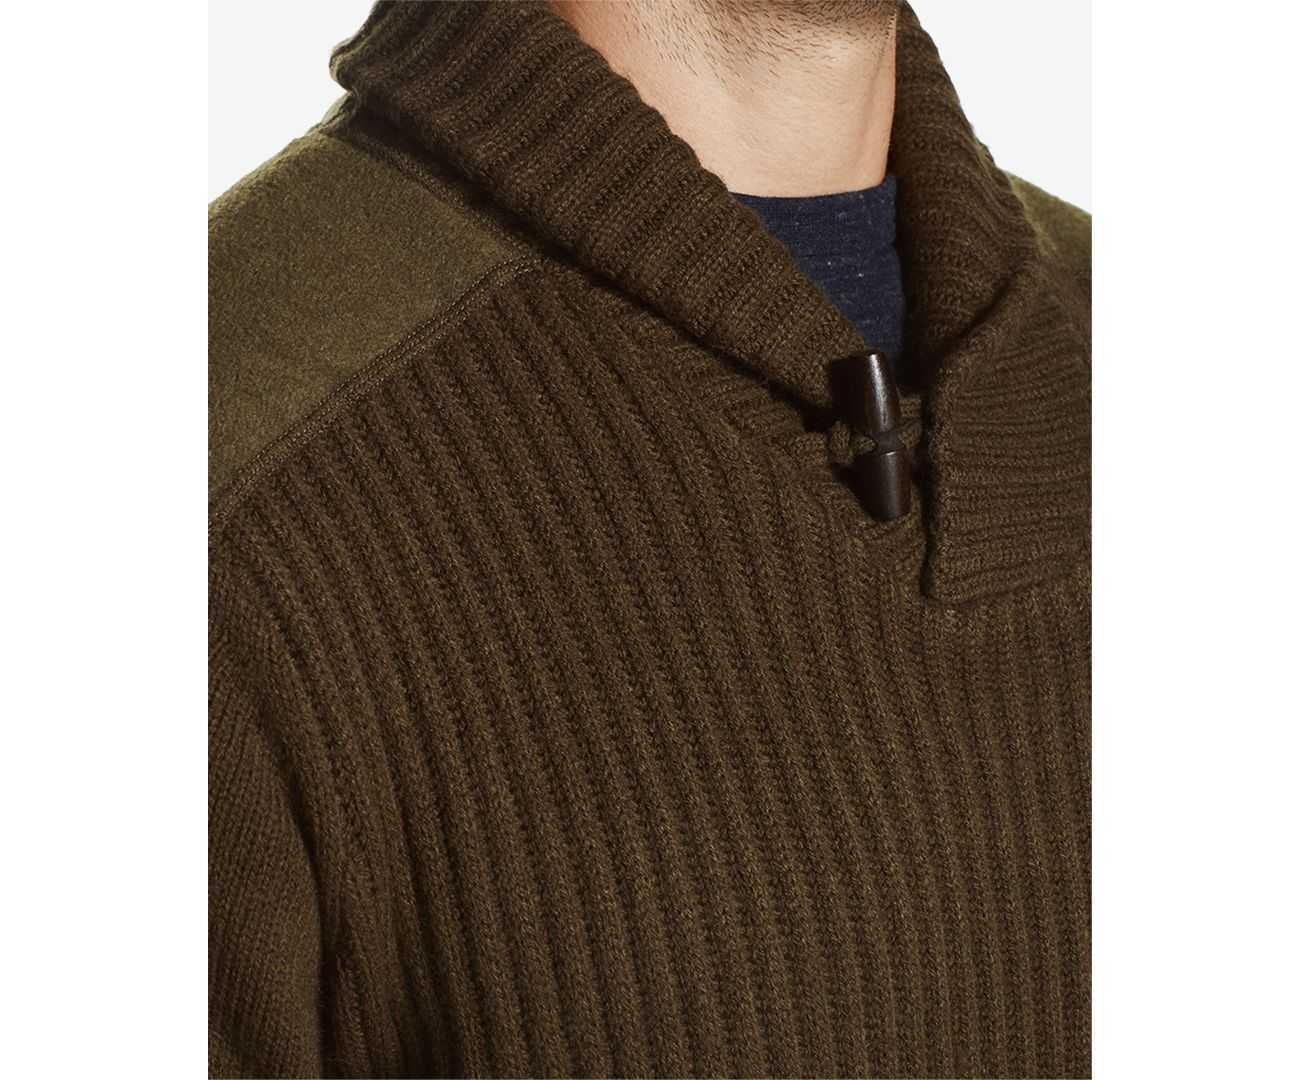 Weatherproof Vintage Mens Ribbed Toggle Shawl-Collar Sweater (Military  Olive, S)